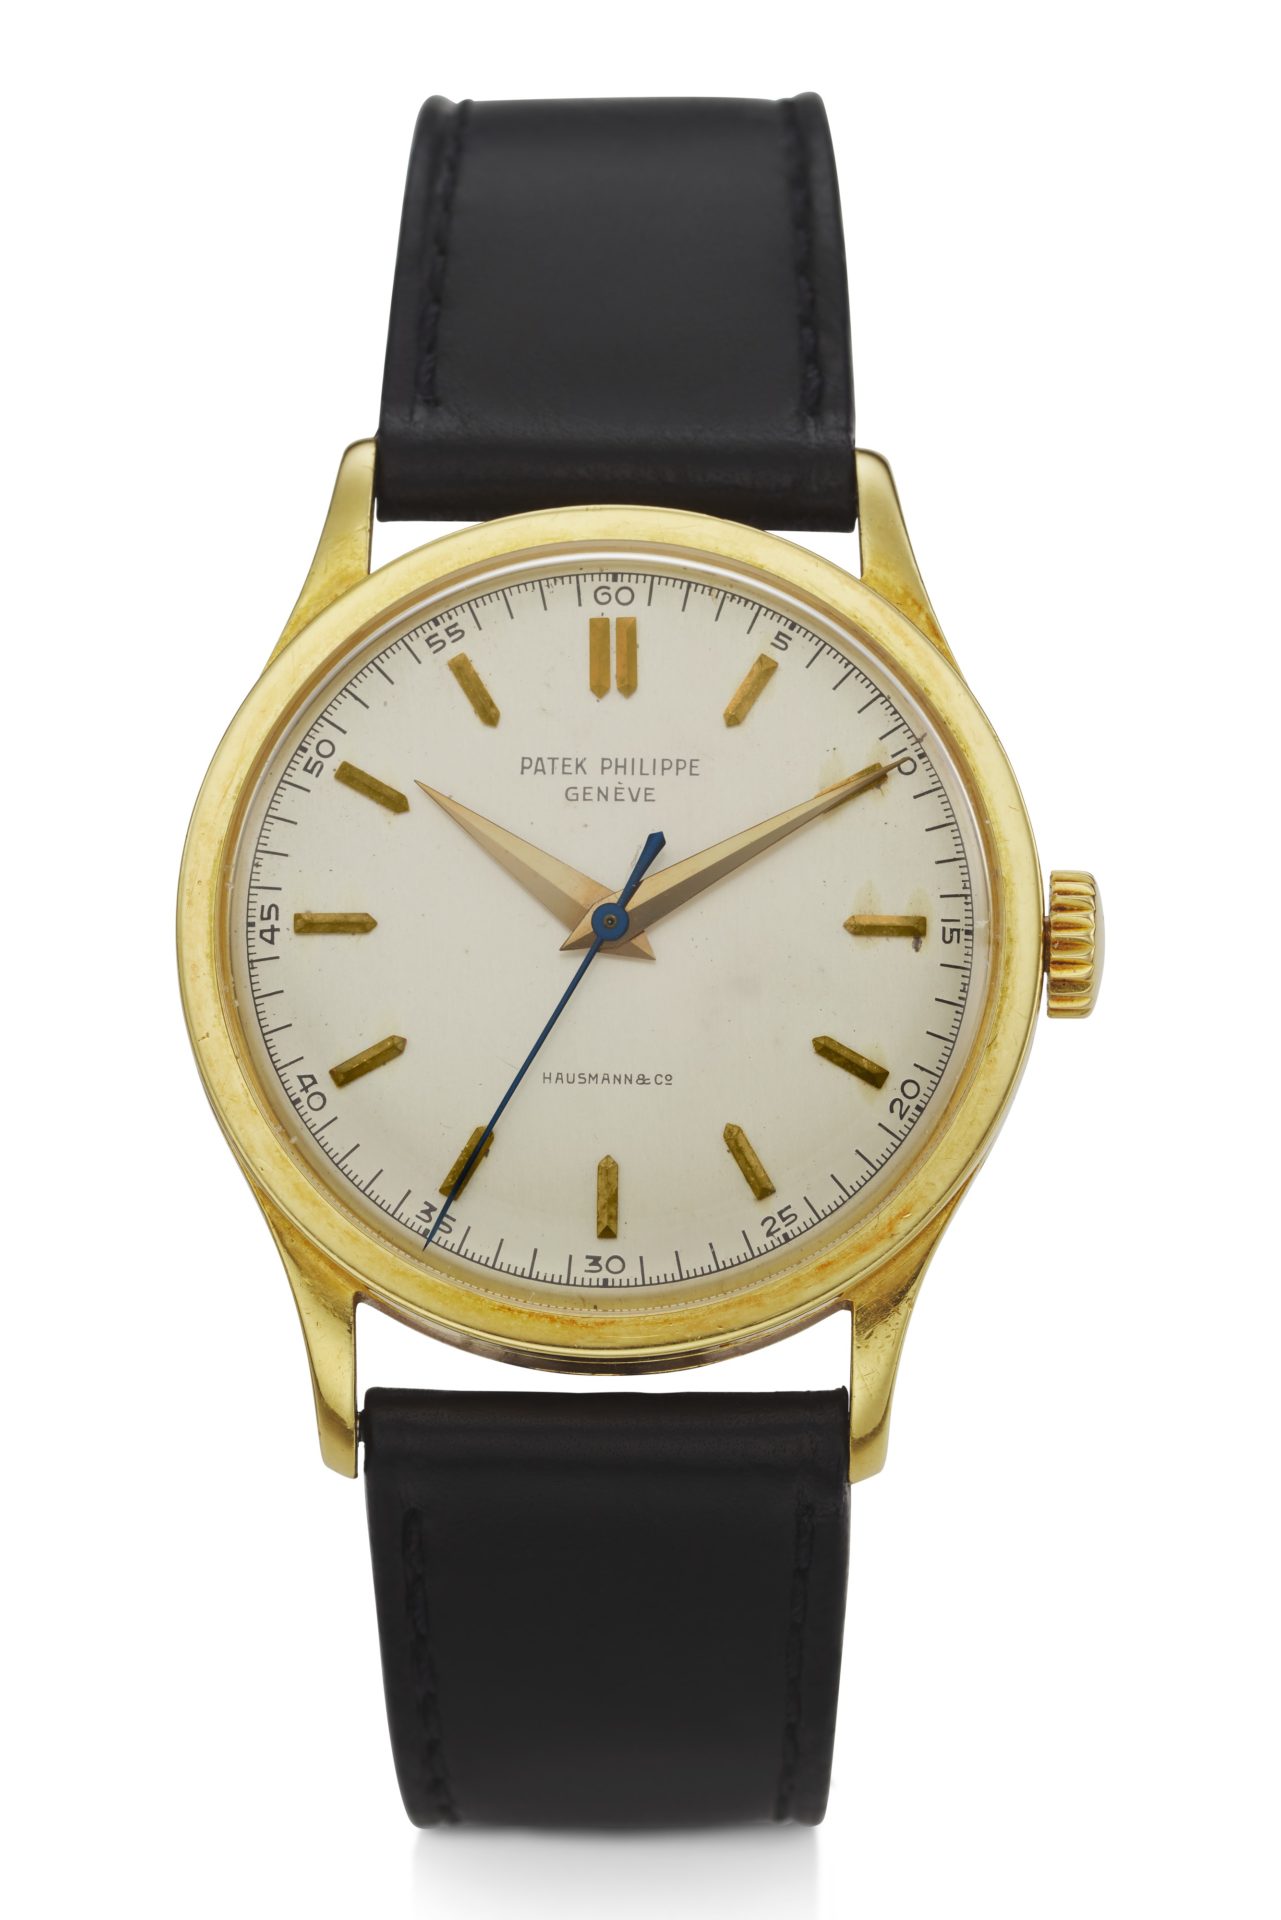 Patek philippe retailed by hausmann co. 18k gold wristwatch ref. 570 formerly owned by andy warhol 1